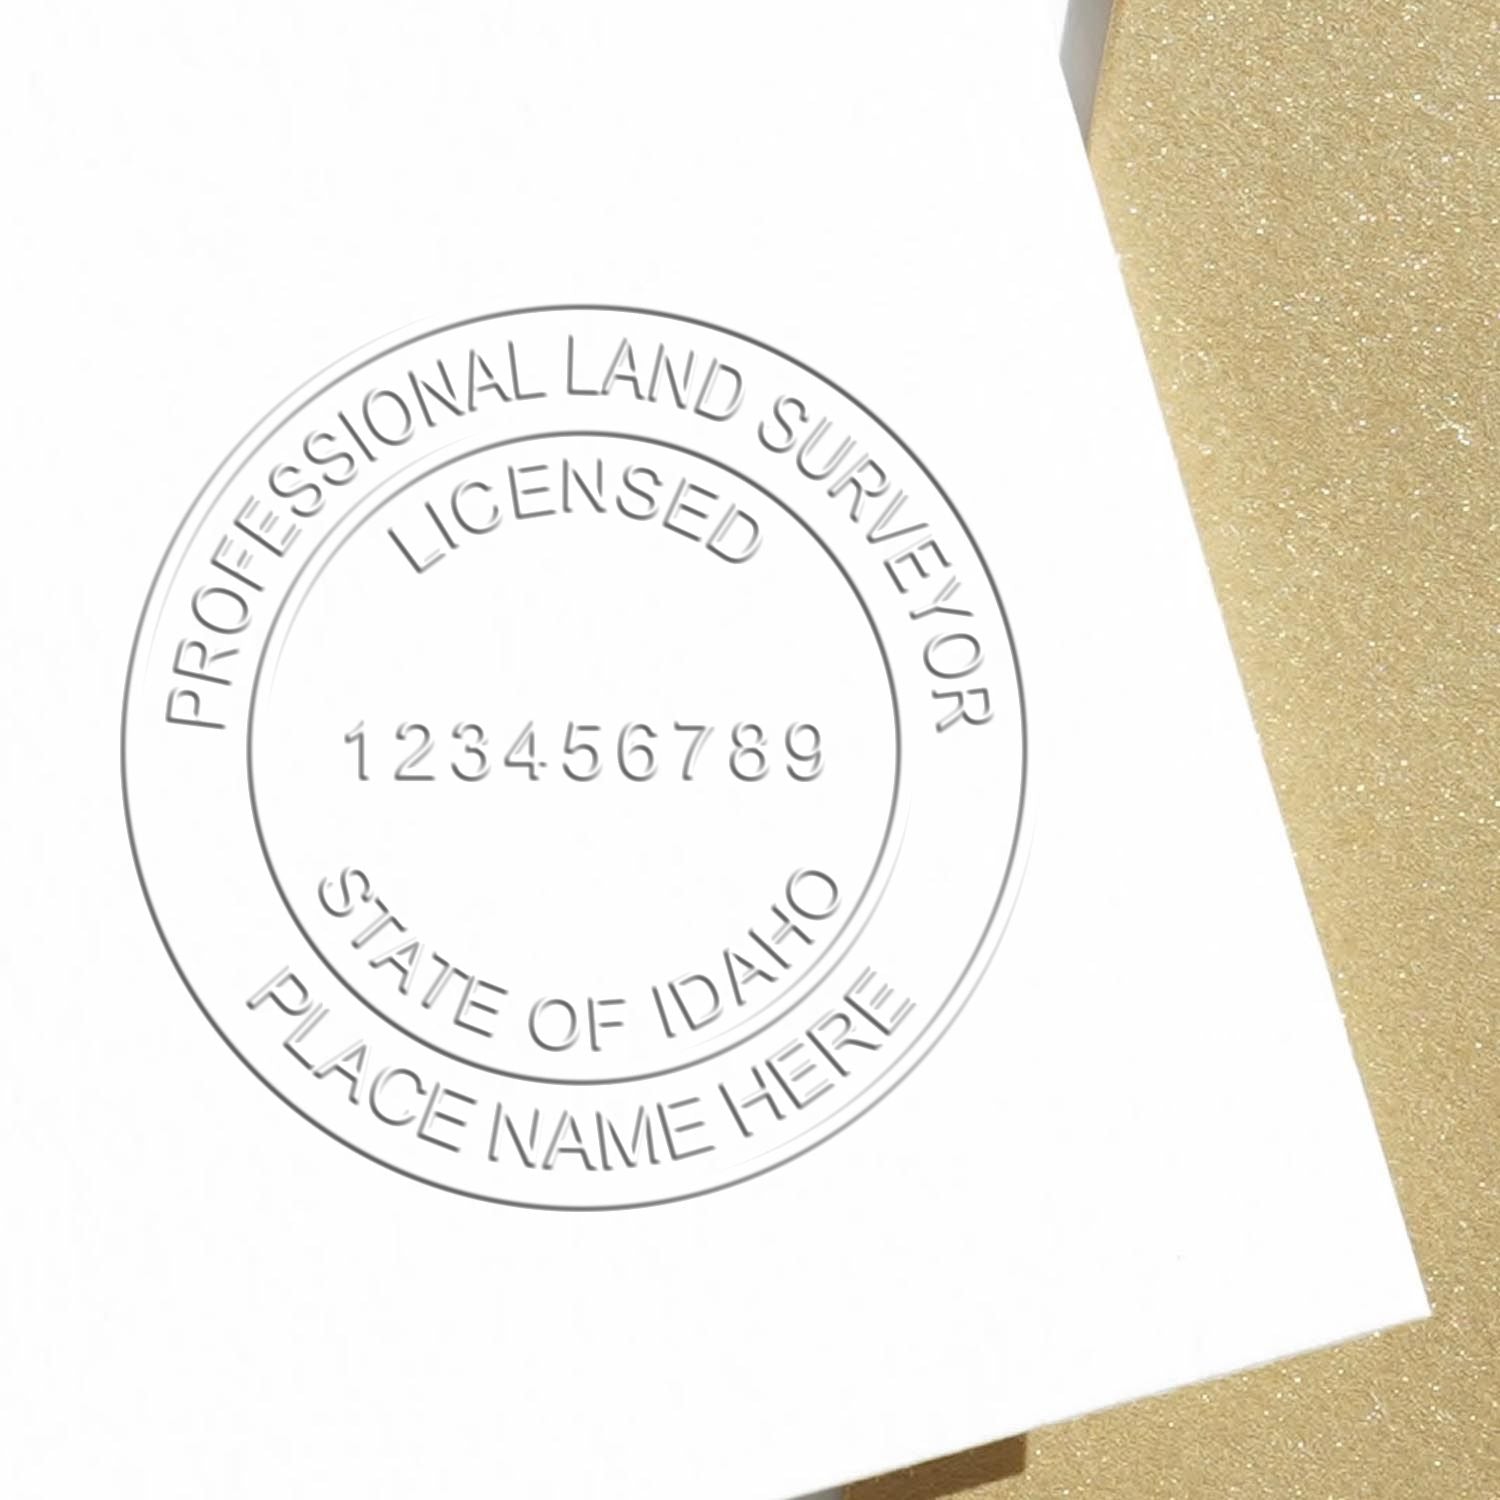 The main image for the Handheld Idaho Land Surveyor Seal depicting a sample of the imprint and electronic files